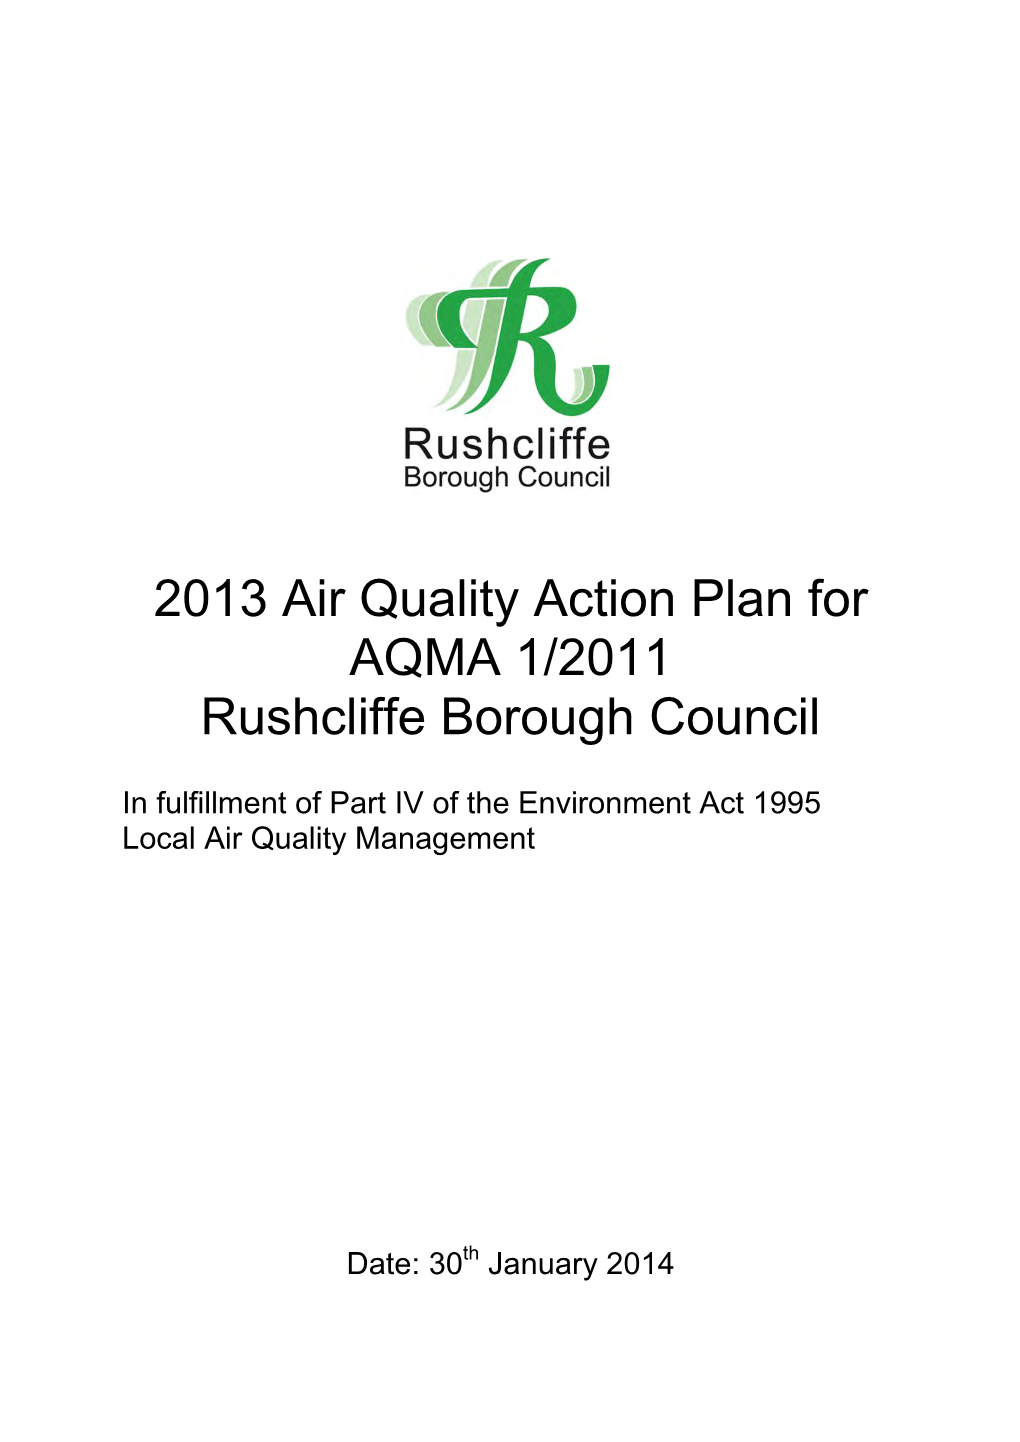 Air Quality Action Plan for AQMA 1 2011, Stragglethorpe Road/A52